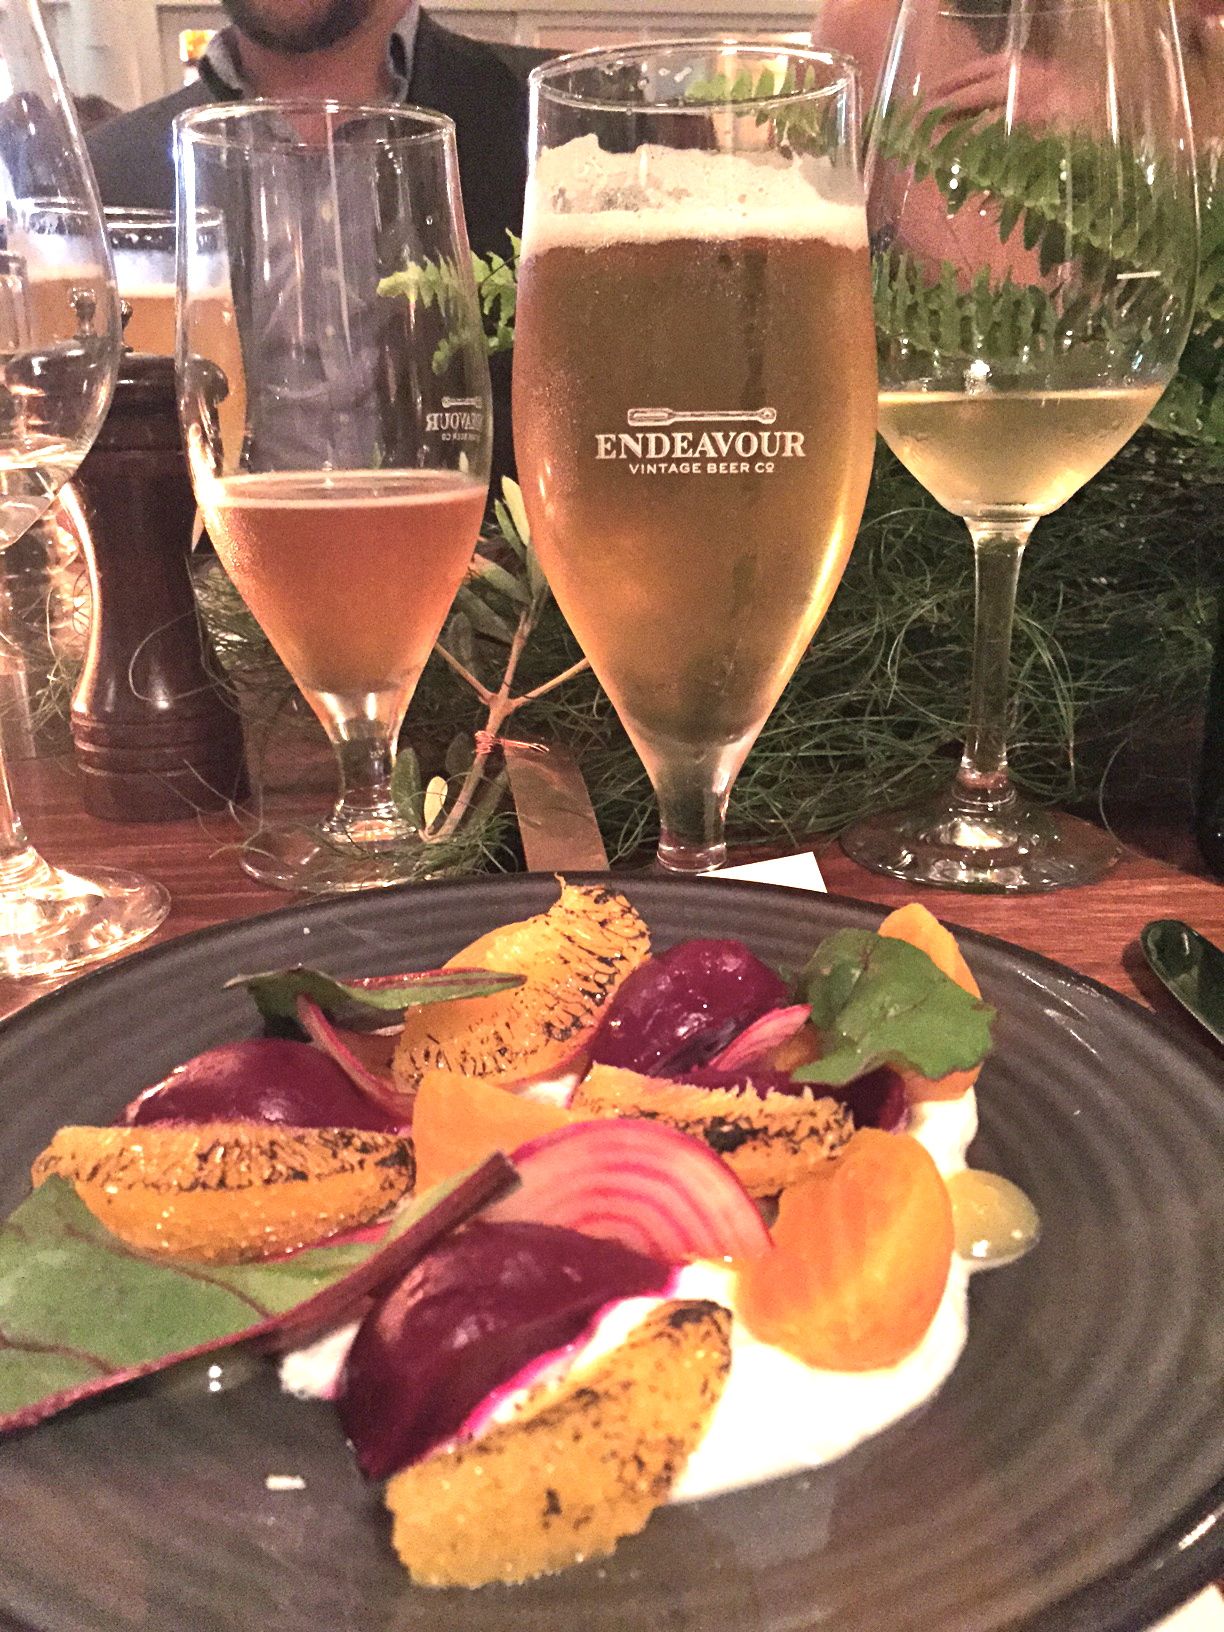 Endeavour beer dinner at Chiswick